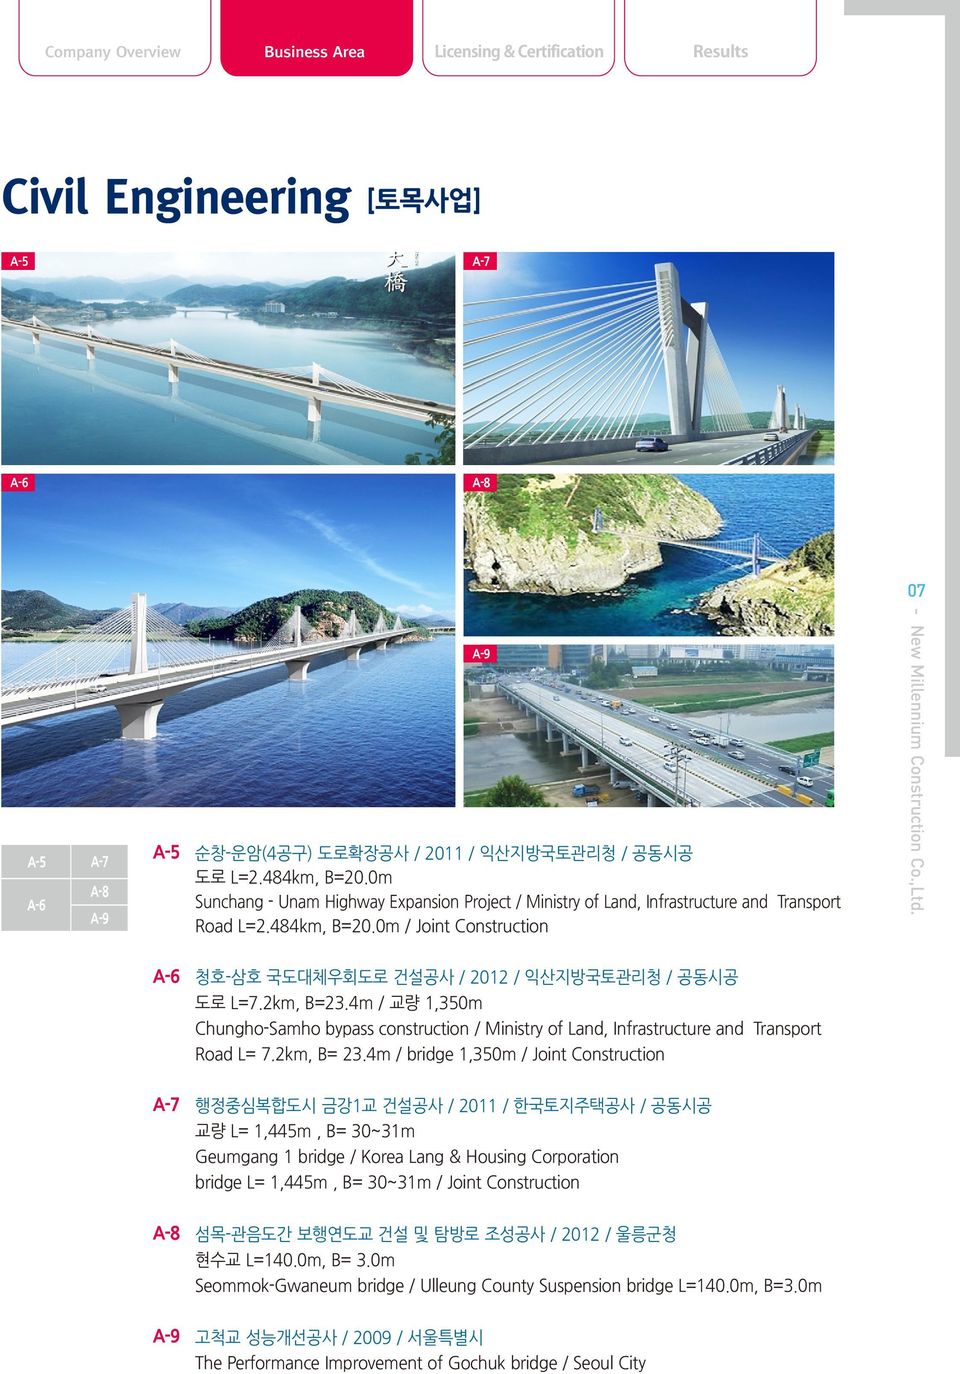 2km, B=23.4m / 교량 1,350m Chungho-Samho bypass construction / Ministry of Land, Infrastructure and Transport Road L= 7.2km, B= 23.